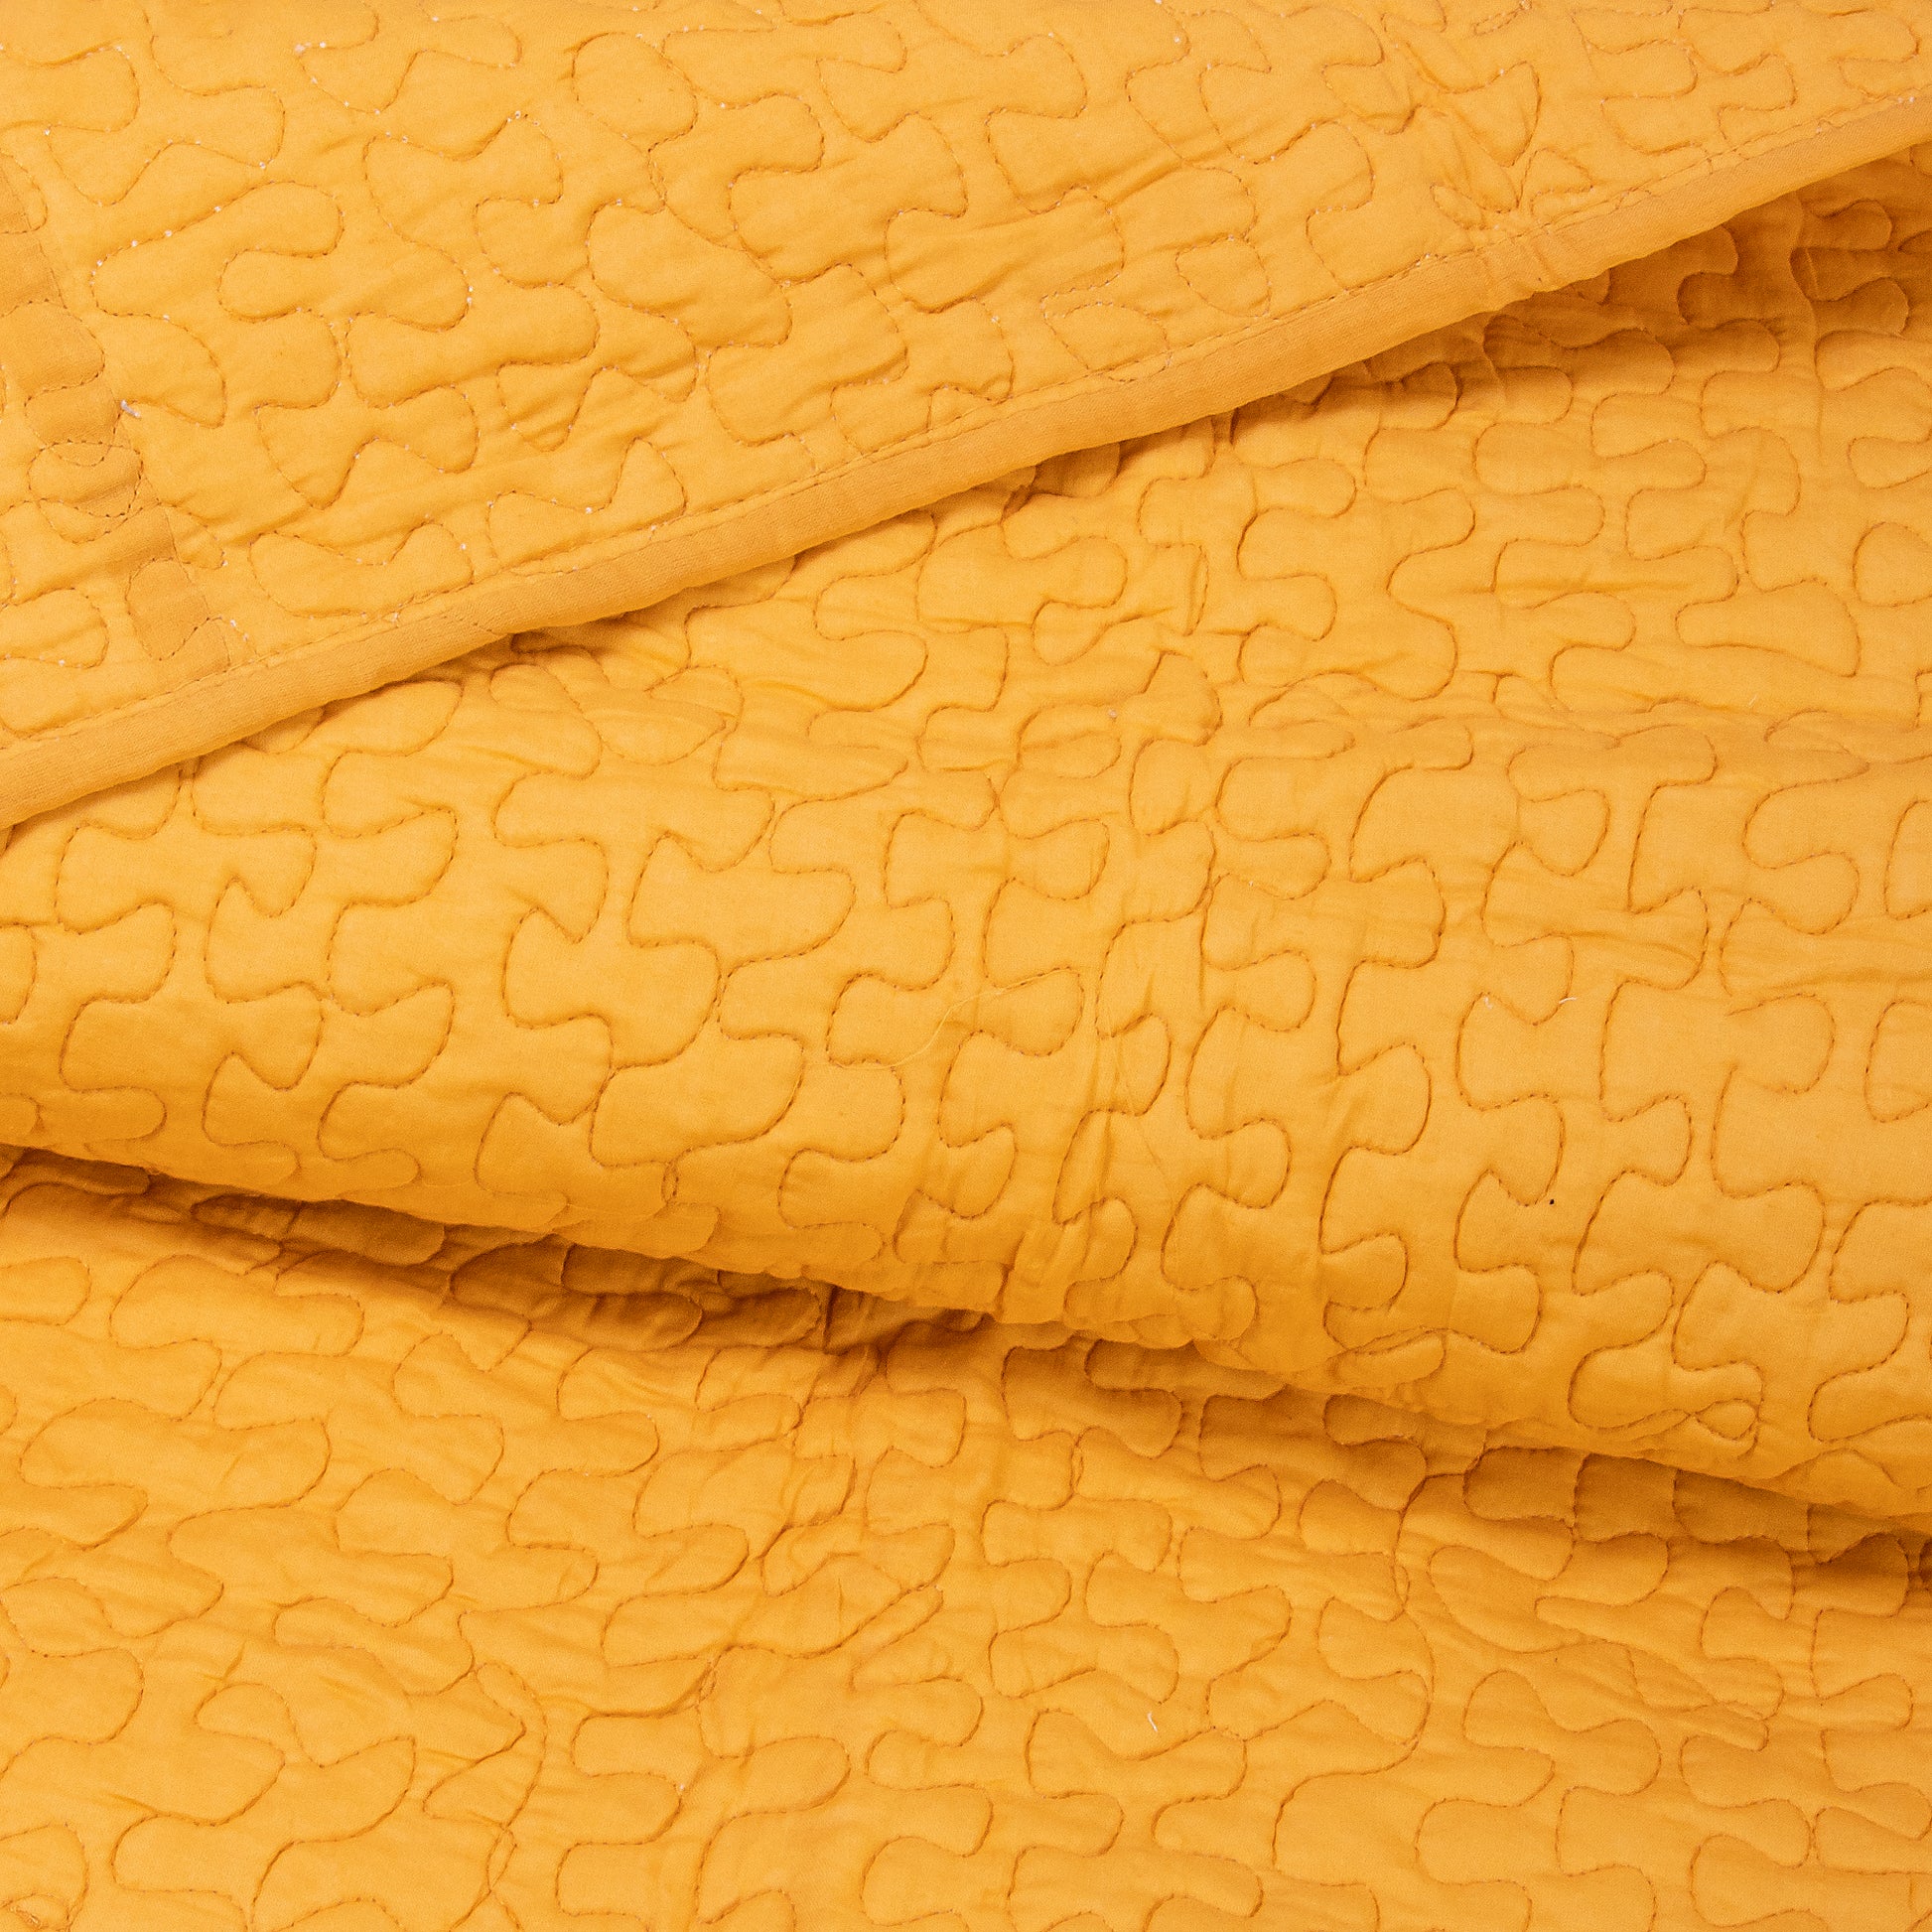 Yellow Luxury Pure Cotton Solid Quilt Bedding Sets Online